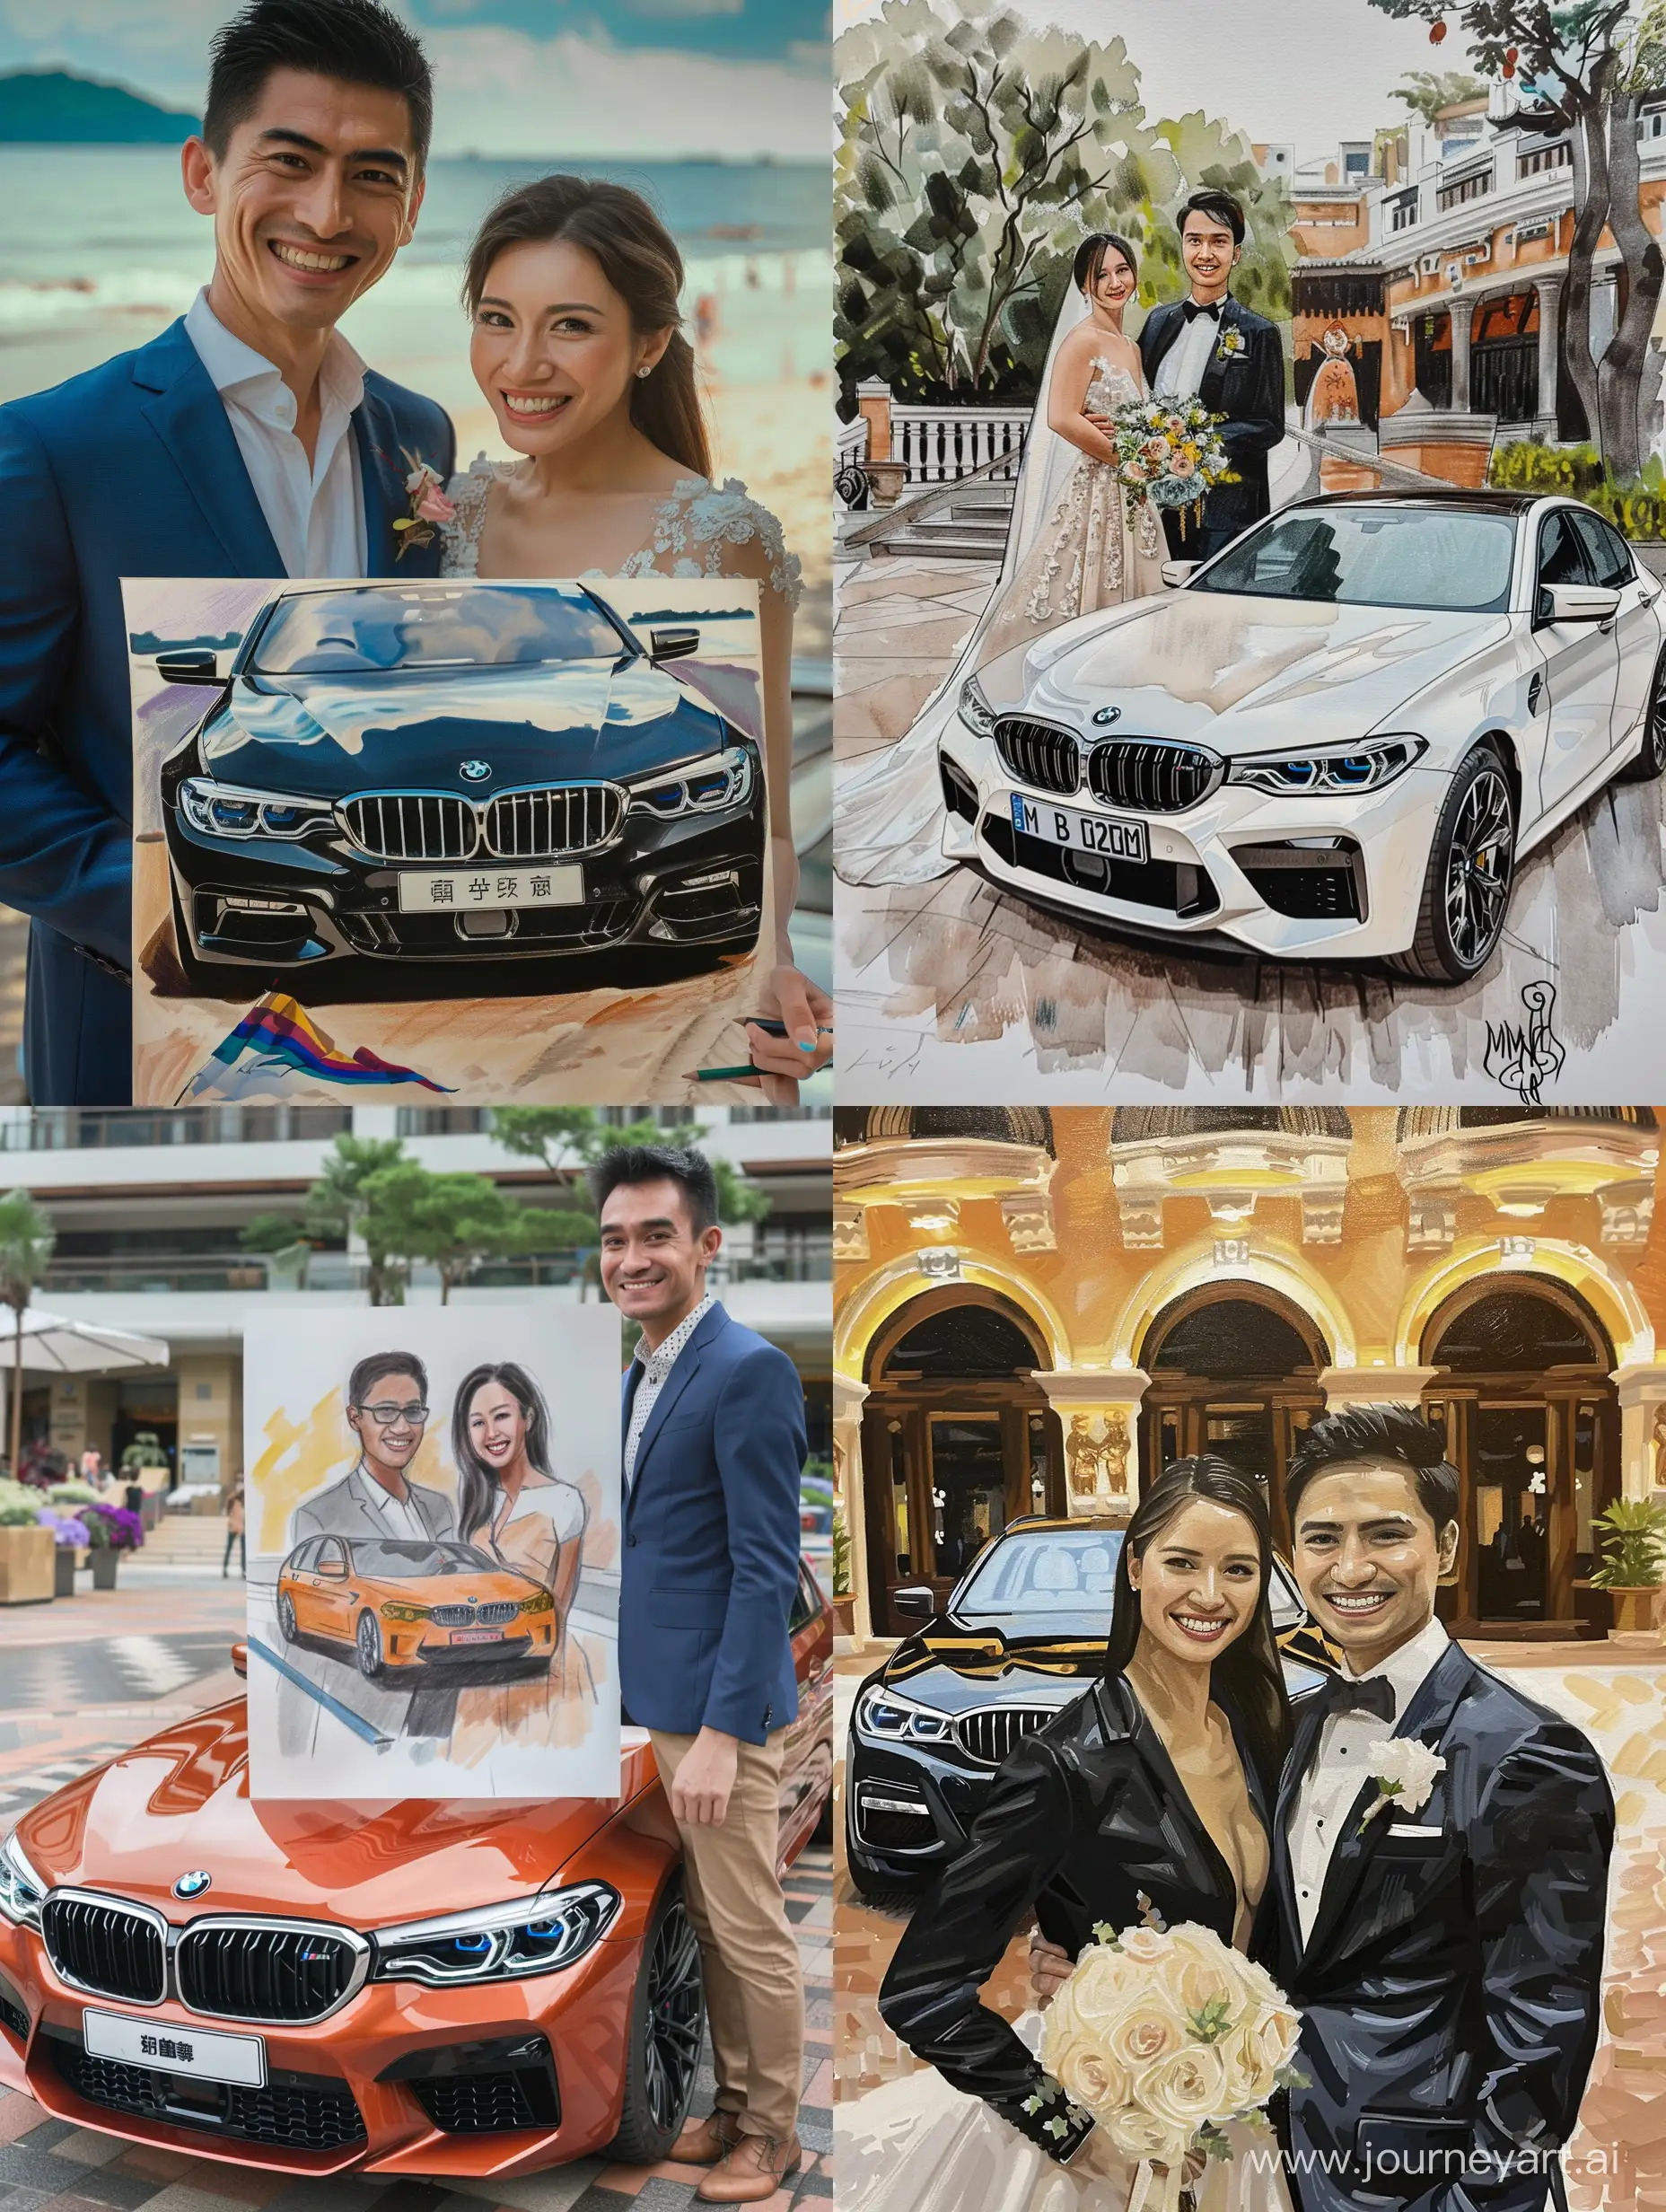 Let the couple draw a picture of the couple in front of the BMW car